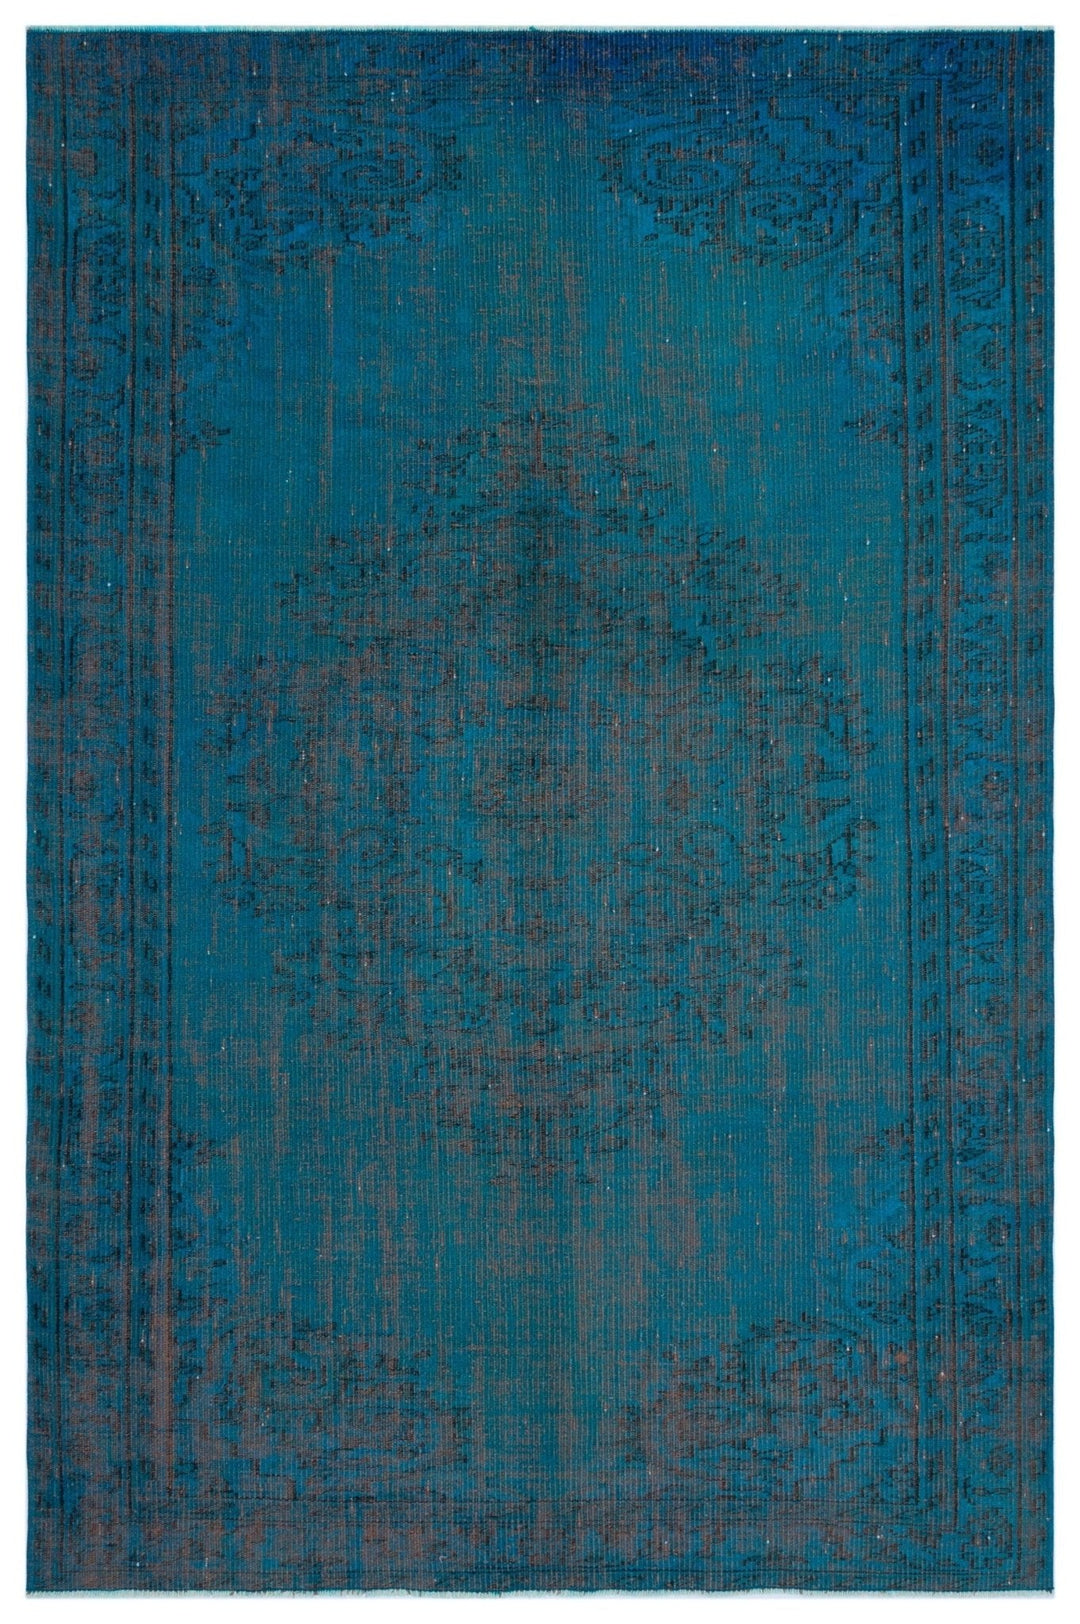 Athens 27900 Turquoise Tumbled Wool Hand Woven Rug 177 x 270